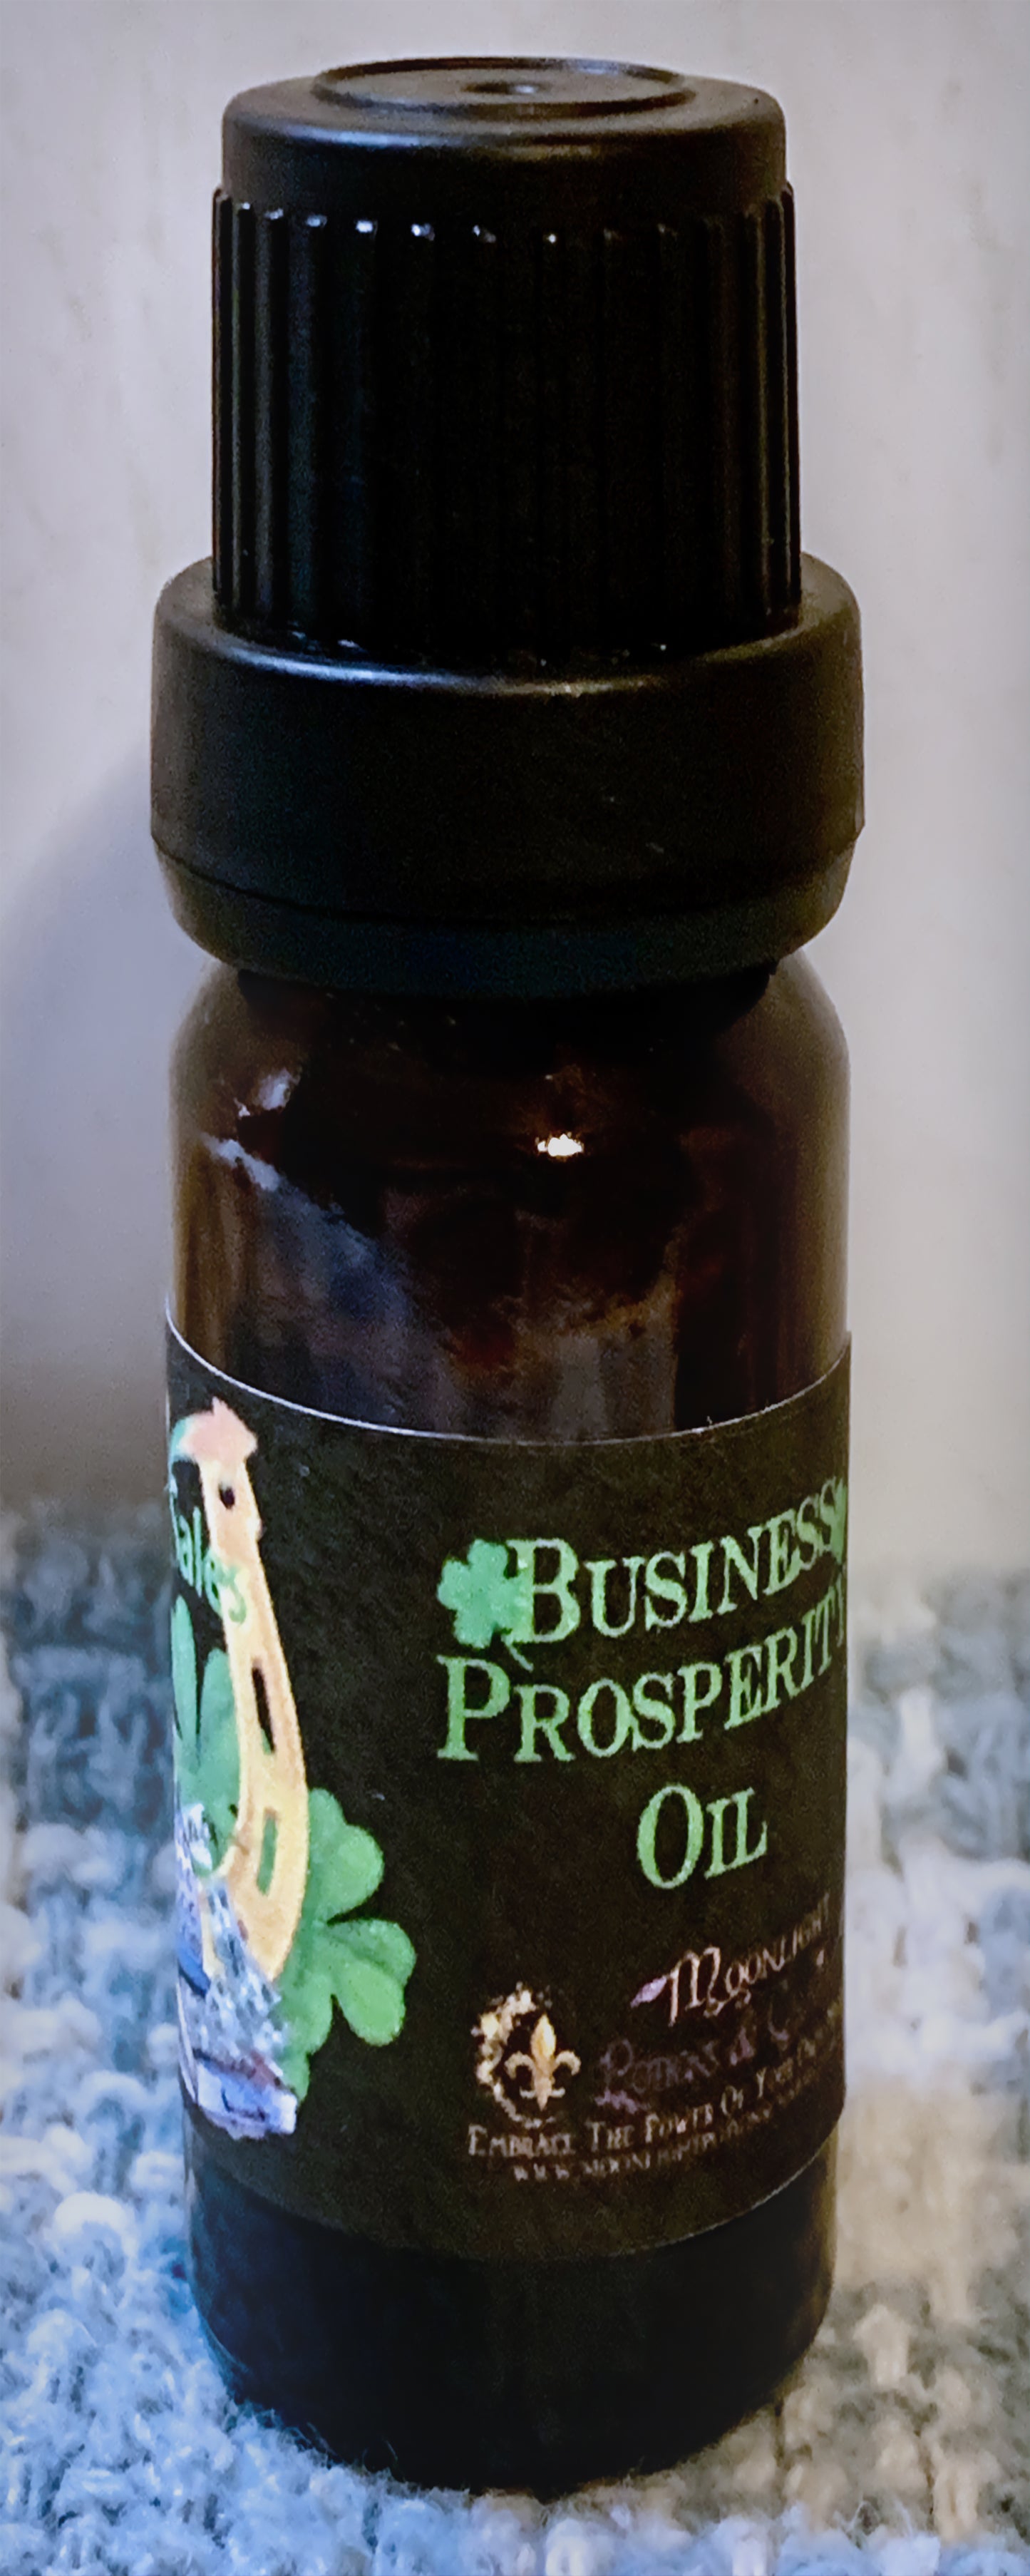 Business Prosperity Oil - Moonlight Potions & Charms